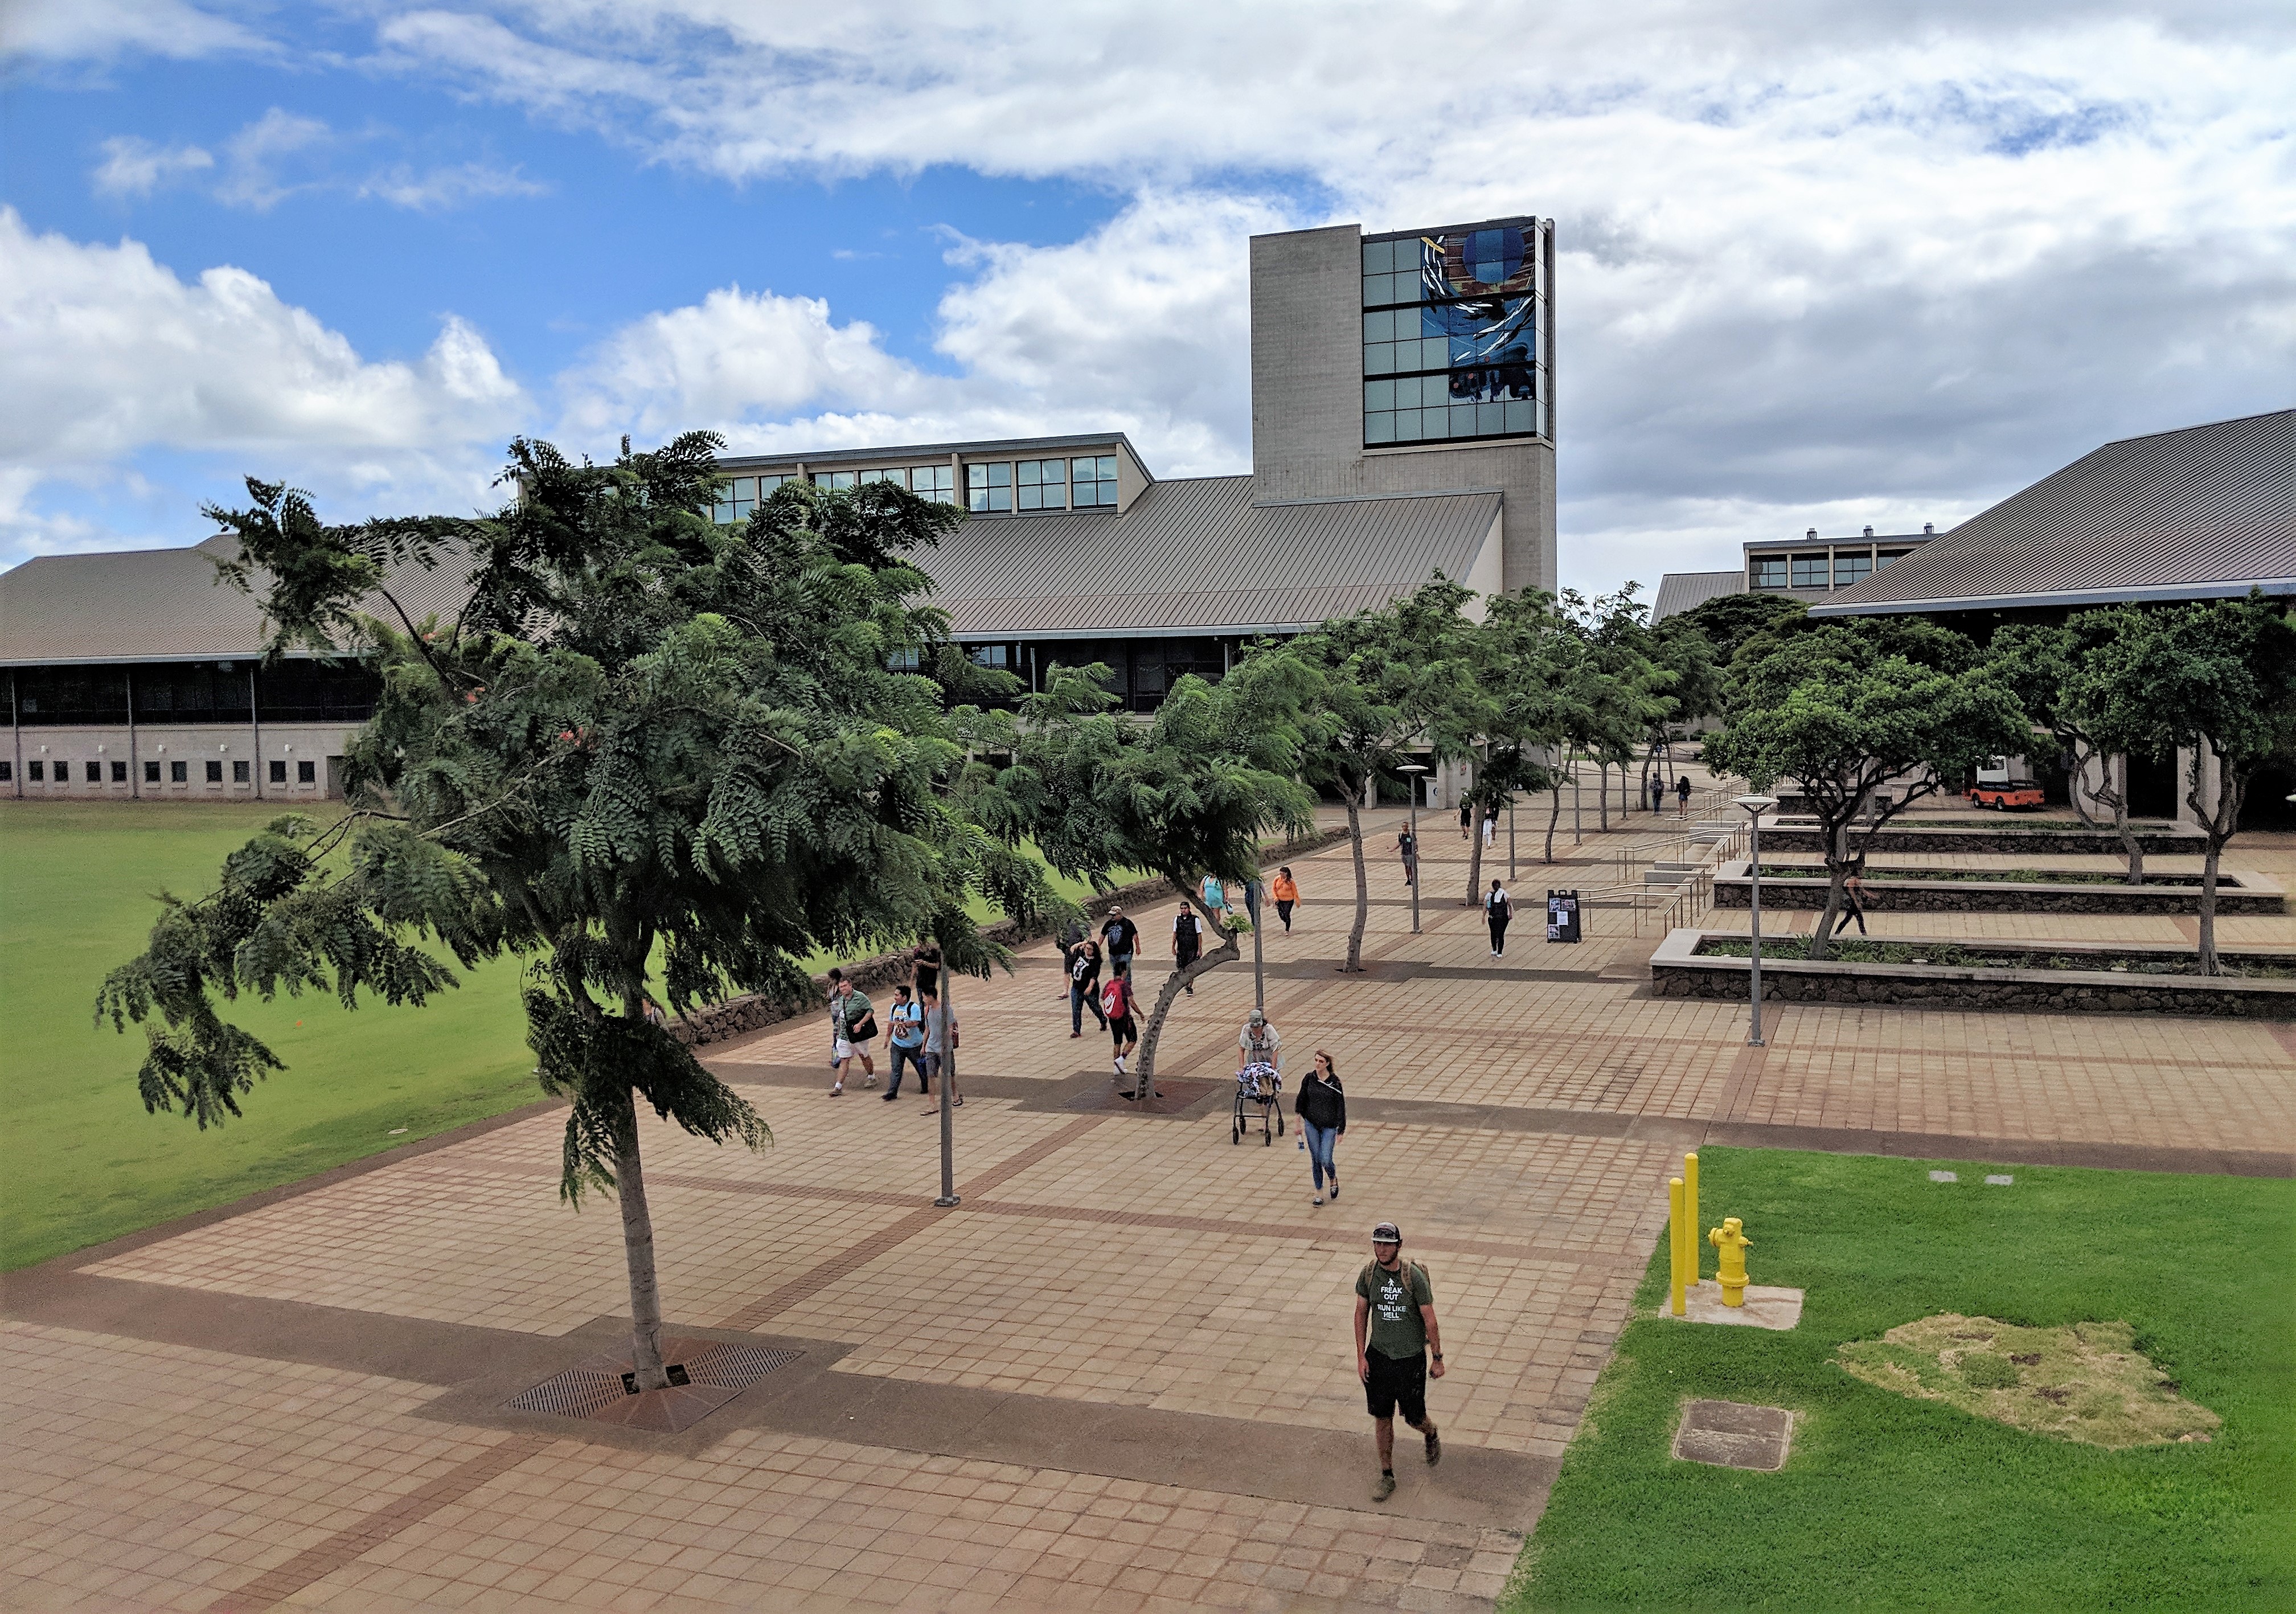 photo of the UH West Oahu campus looking from the Campus Center down at the broad walkway fronting the Campus Center Plaza. Students are walking and trees line the concrete walkway. In the background is the library building.